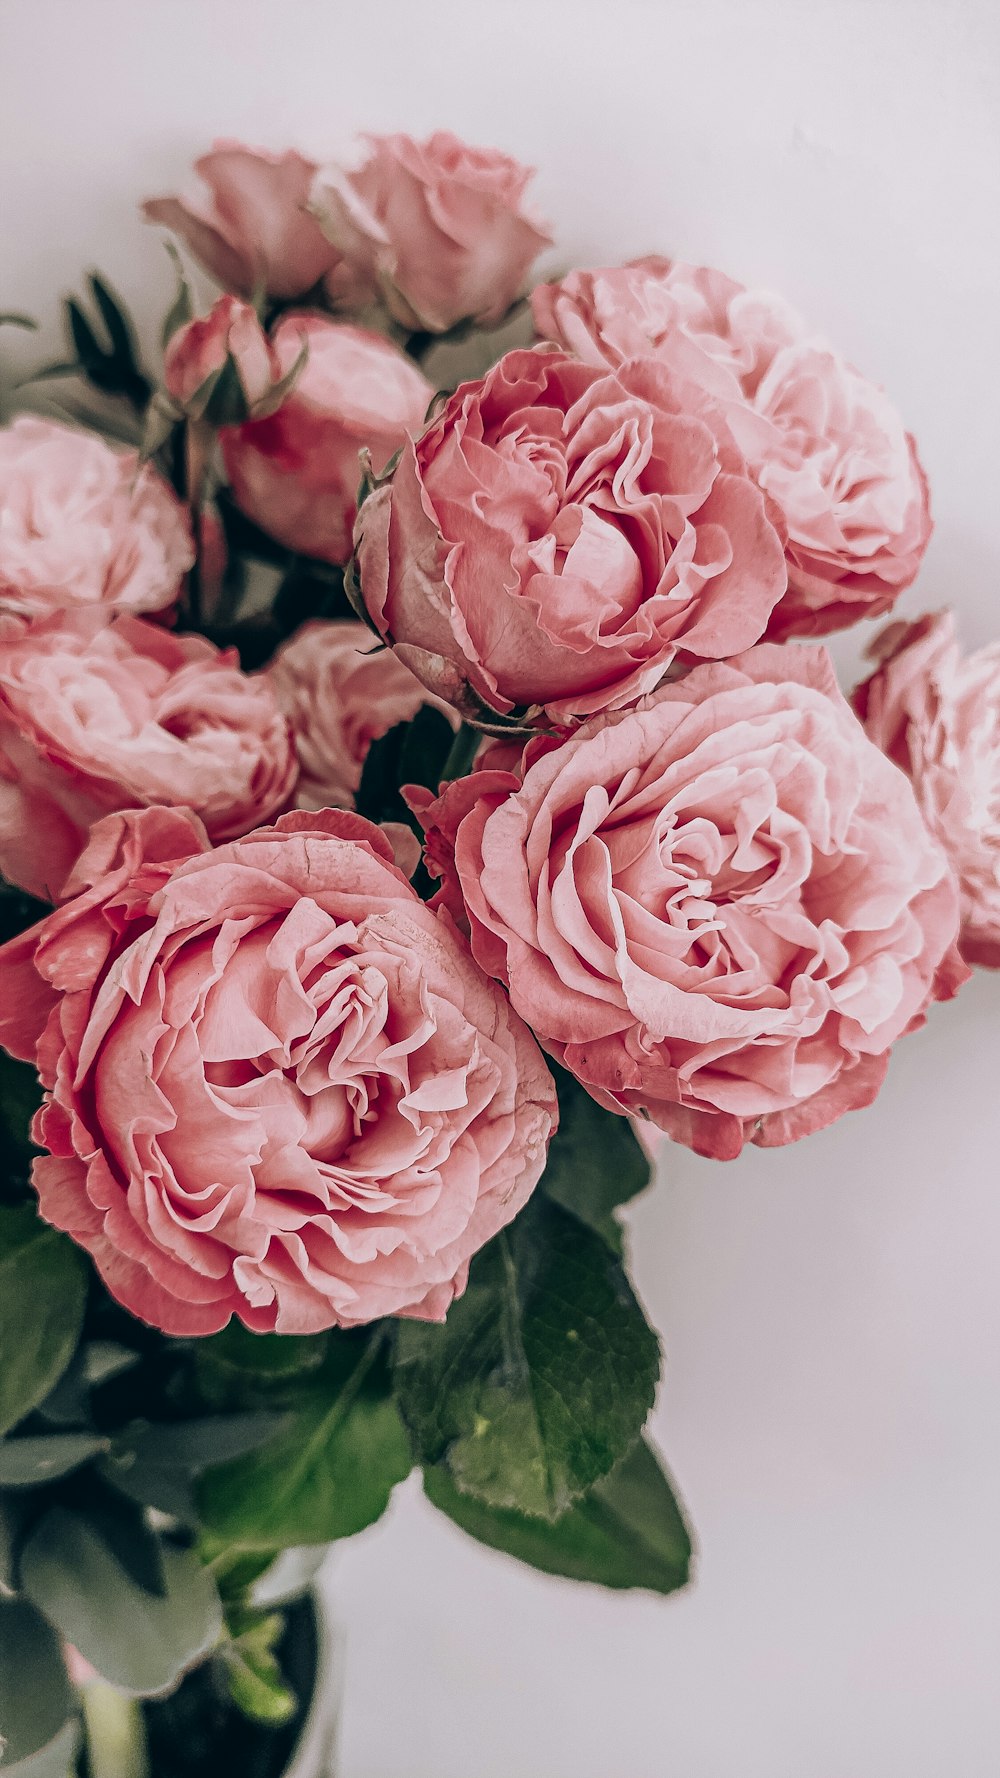 Rose Pictures [HD] | Download Free Images & Stock Photos on Unsplash